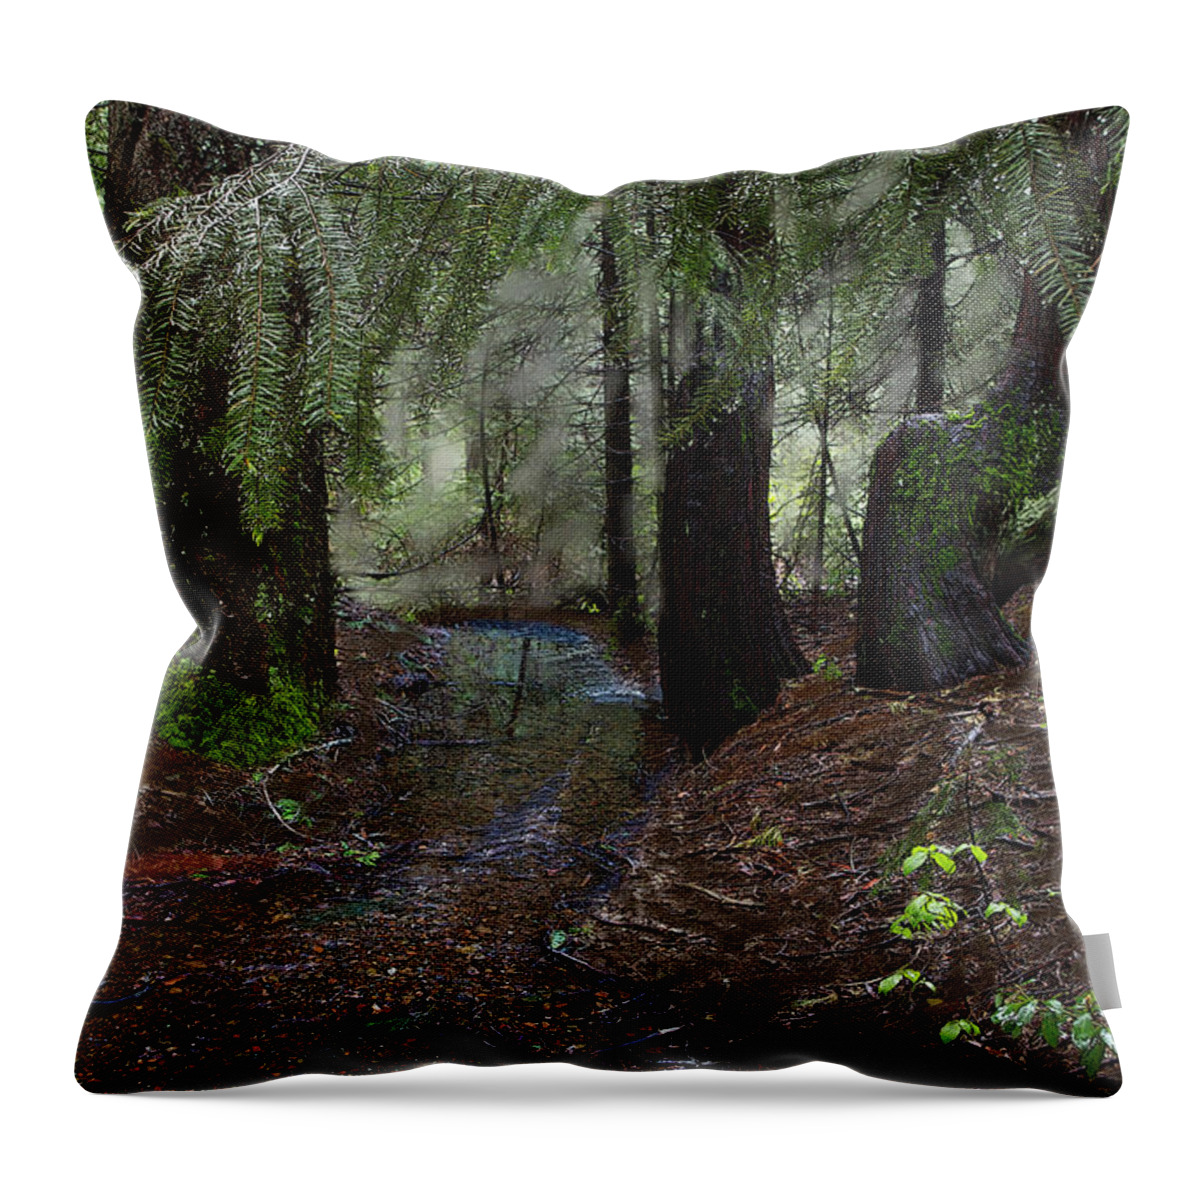 Headwaters Throw Pillow featuring the digital art Deer Creek Headwaters at Skillman Horse Campground by Lisa Redfern